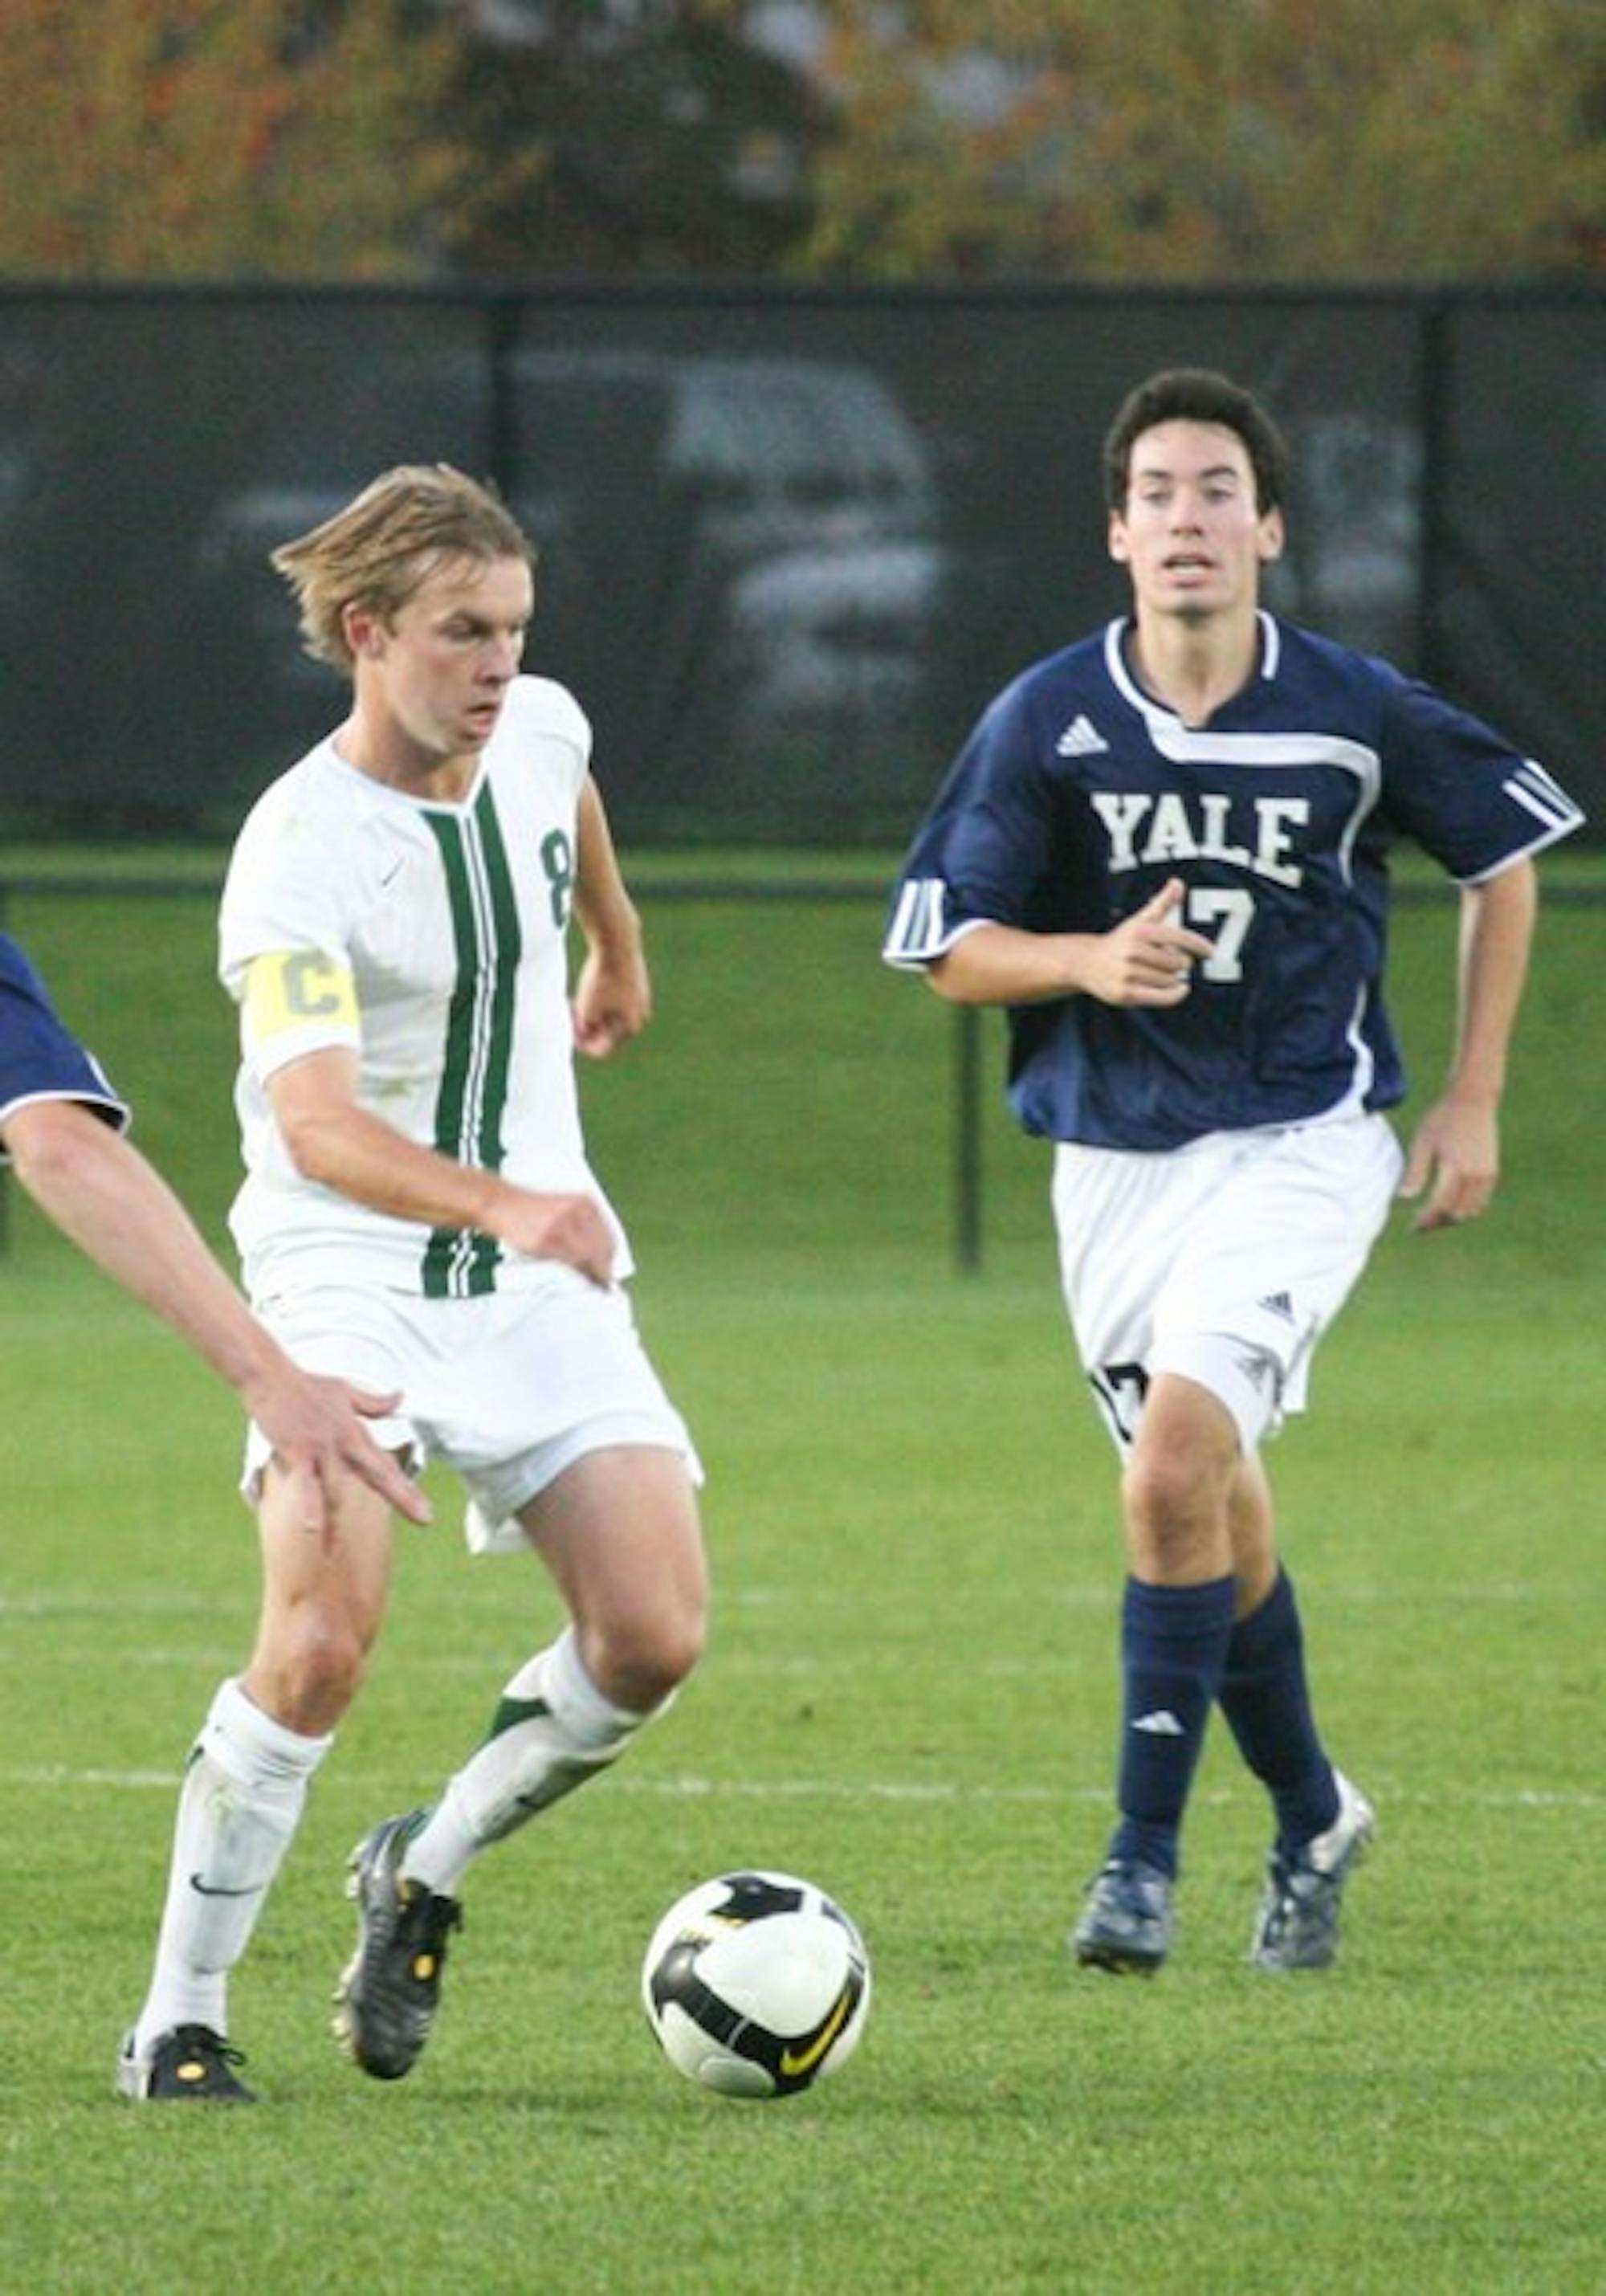 Captain Craig Henderson '09 was unanimously chosen as Ivy League Player of the Year. He is the first Dartmouth player to win the award since 1992.